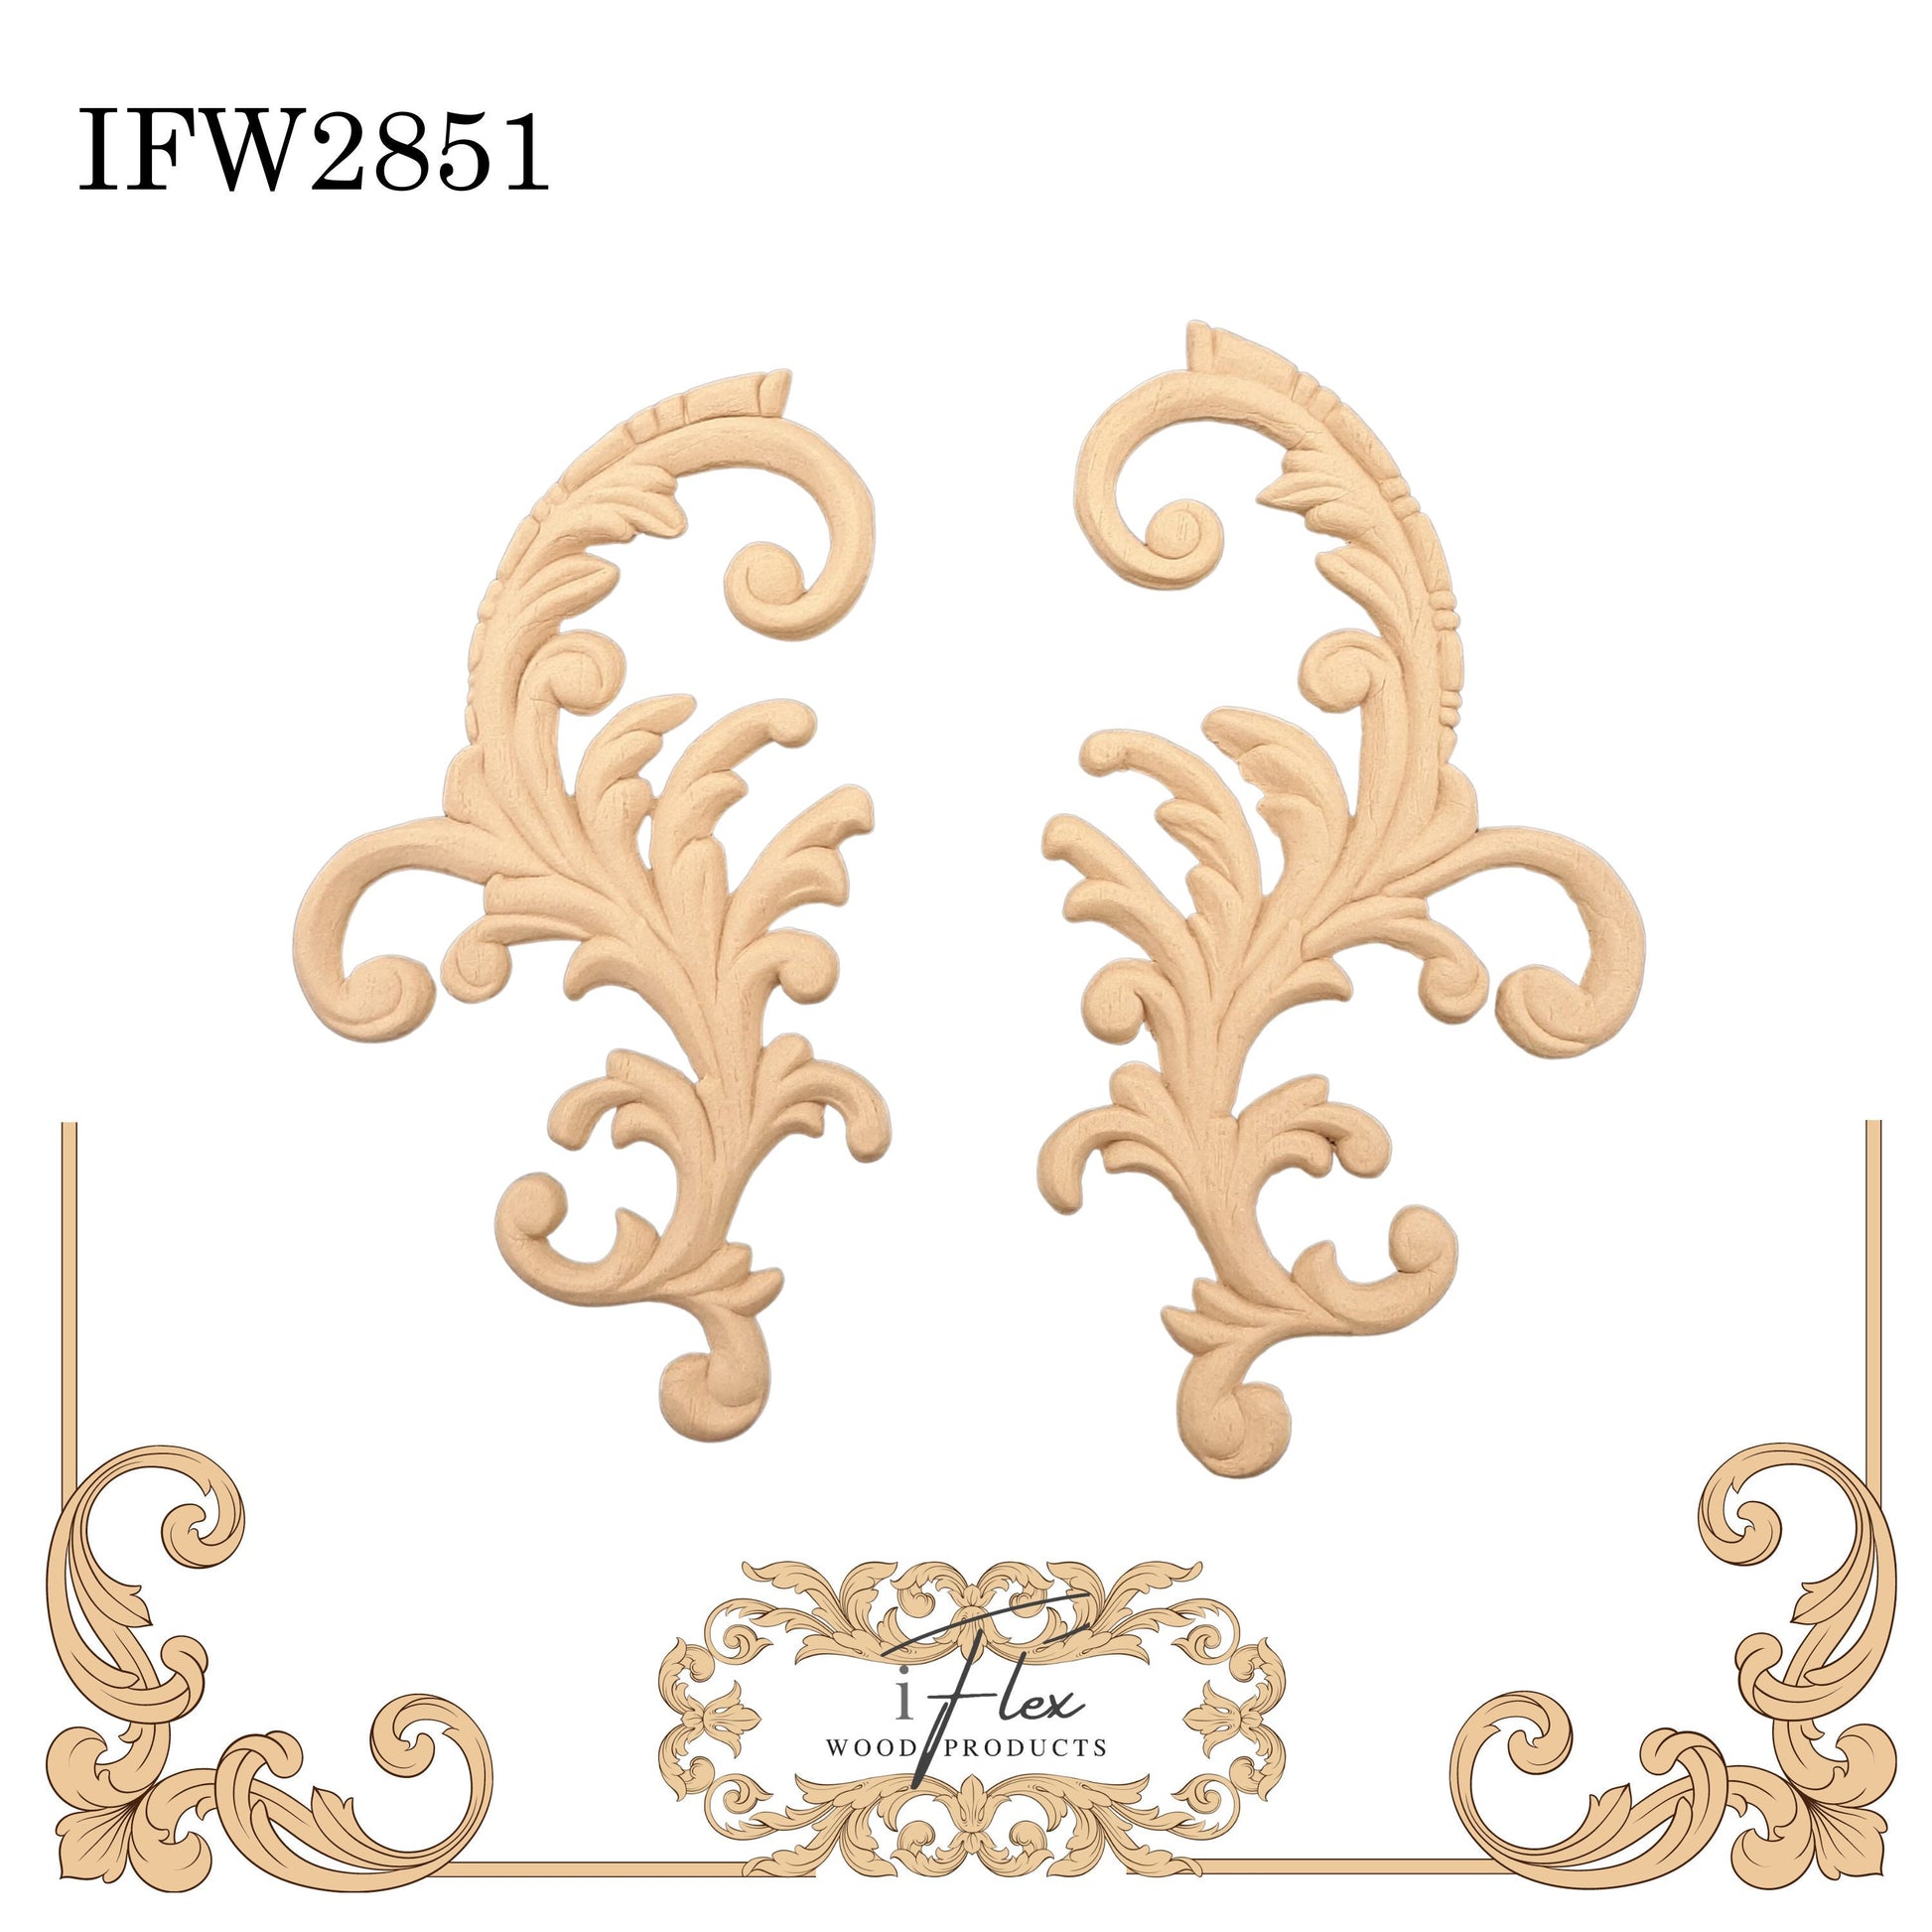 IFW 2851 iFlex Wood Products, bendable mouldings, flexible, wooden appliques, scroll pair